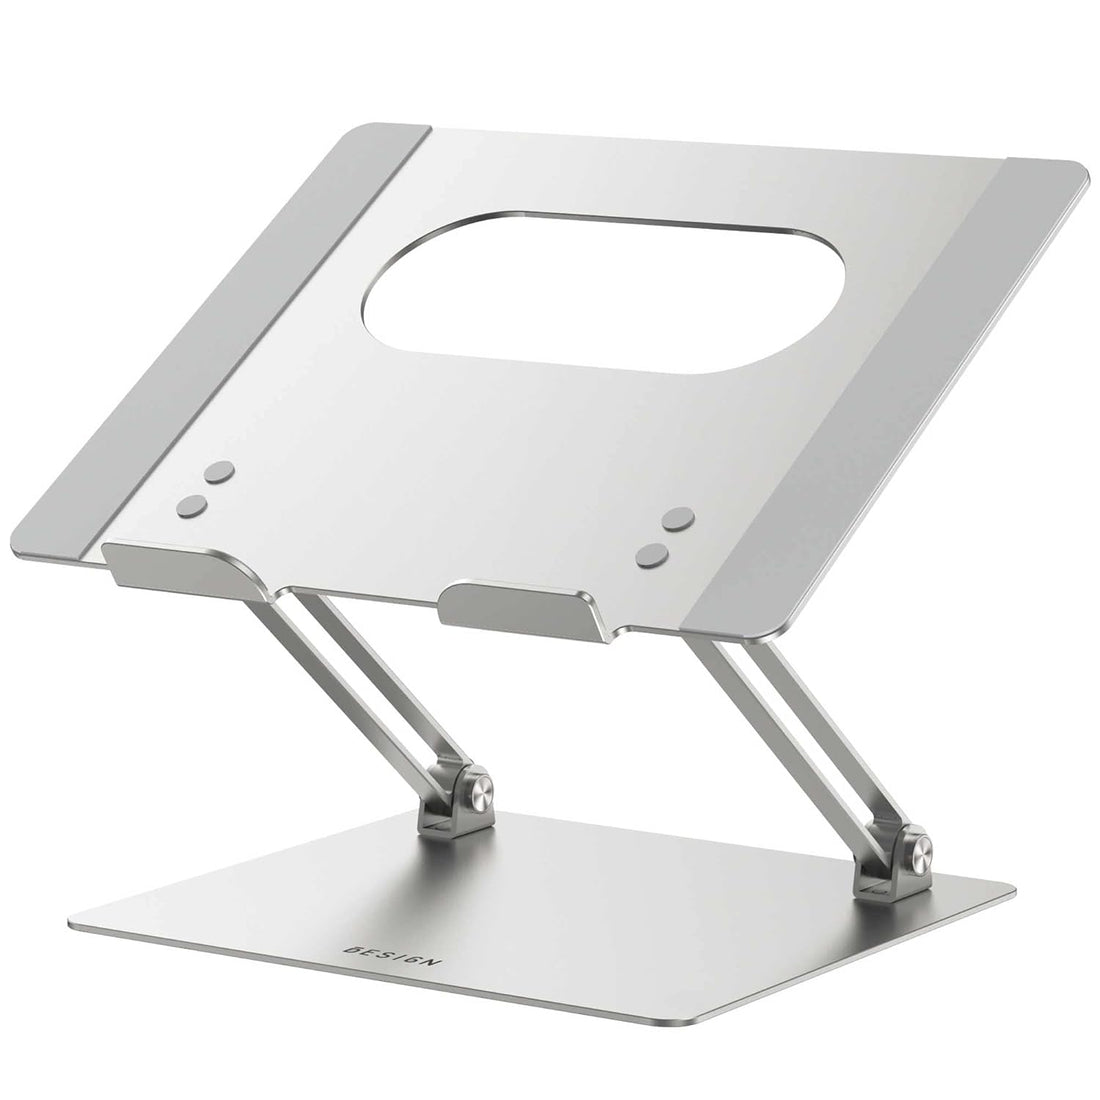 Besign LS10 Aluminum Laptop Stand, Ergonomic Adjustable Notebook Stand, Riser Holder Computer Stand Compatible with Air, Pro, Dell, HP, Lenovo More 10-15.6" Laptops, Silver